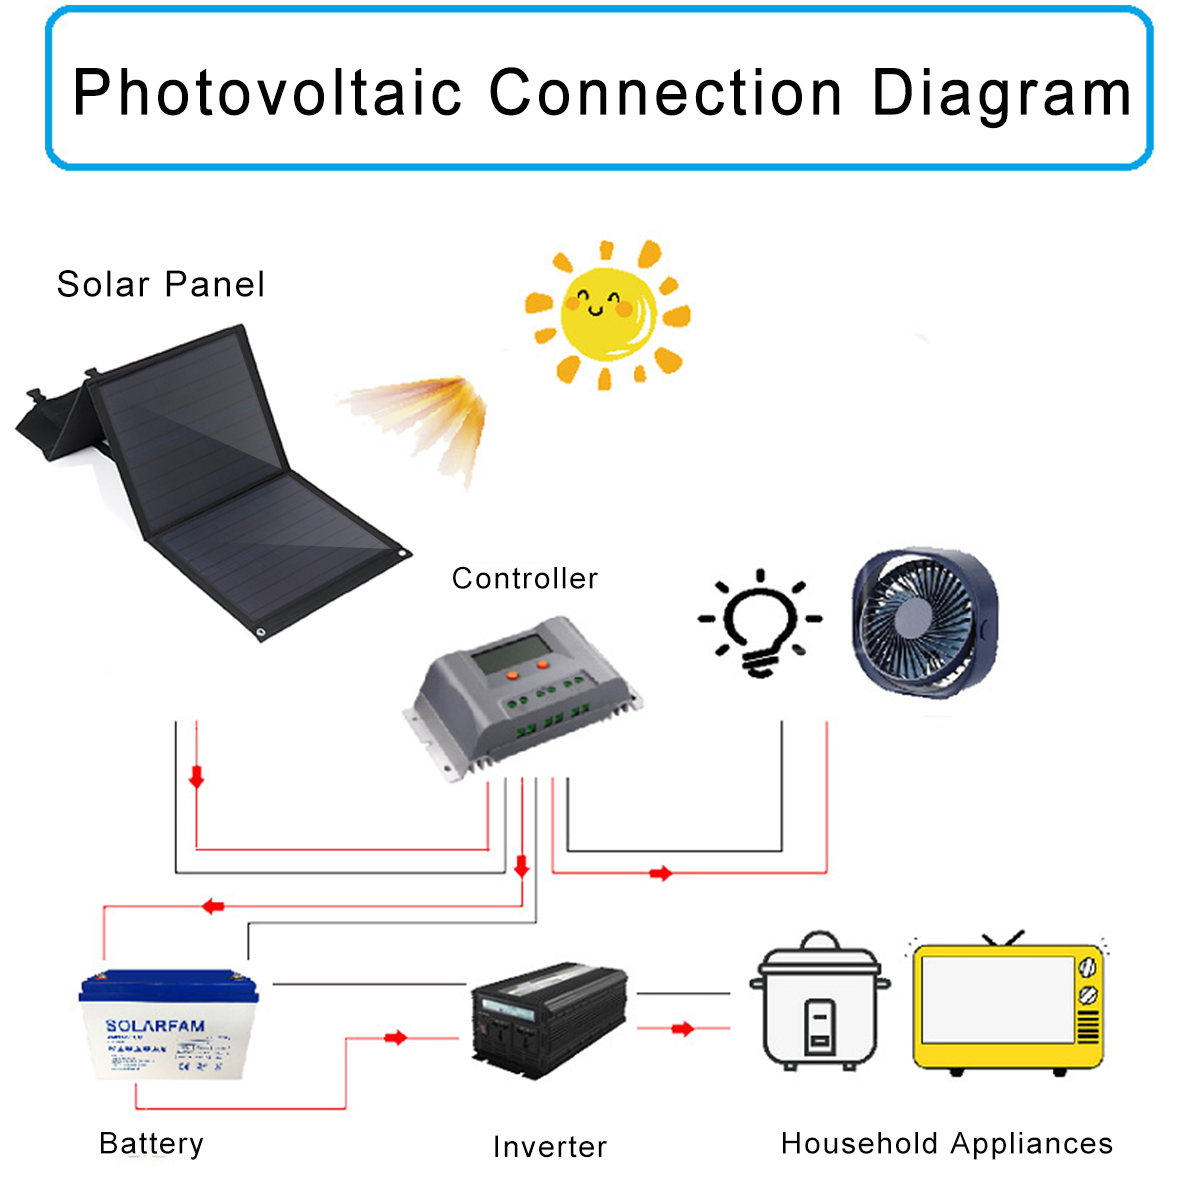 60W-USB-Solar-Panel-Folding-Monocrystalline-PET-Power-Charger--for-Phone-RV-Car-MP3-PAD-Charger-Outd-1905385-9